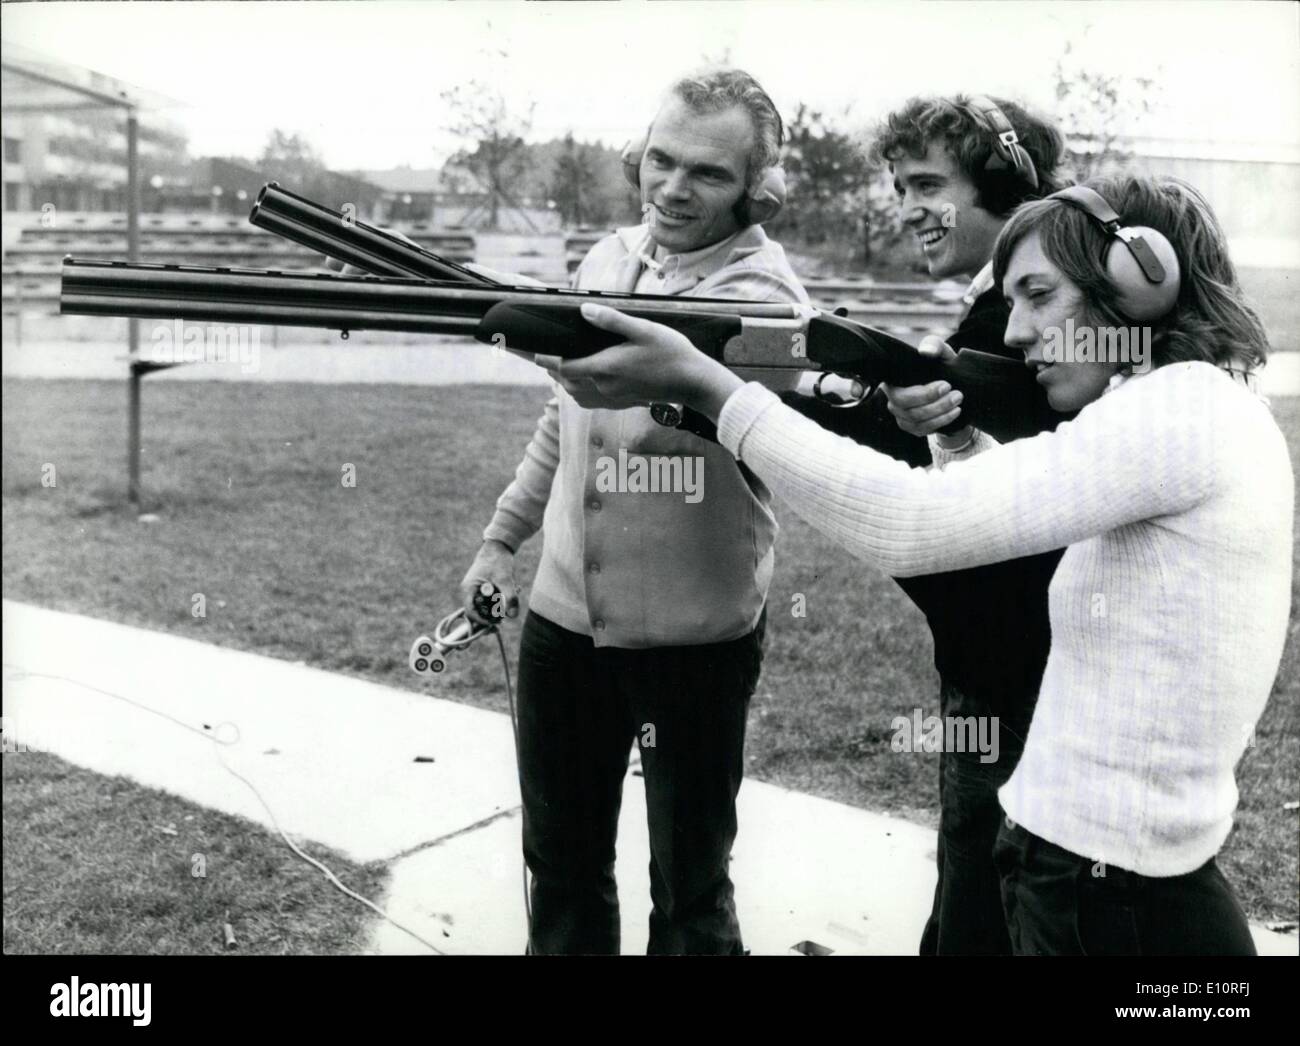 Oct. 10, 1973 - German top skier trying their luck in skeet shooting Aiming at new goals...are the two member&deg; of the German national skiing team Miss Rosi Mittermaier (right) and Mr. Christian Neureuth, (centre) assisted by an expert: Mr. German olympic winner in skeet. The two top winter athletes made their first experience in this discipline at Munich's Olympic shooting range just recently. According to Mr. dinkier, both proved to be very talented for skeet shooting. Perhaps one of these days the ski champions will switch completely from skiing to skeet? Stock Photo